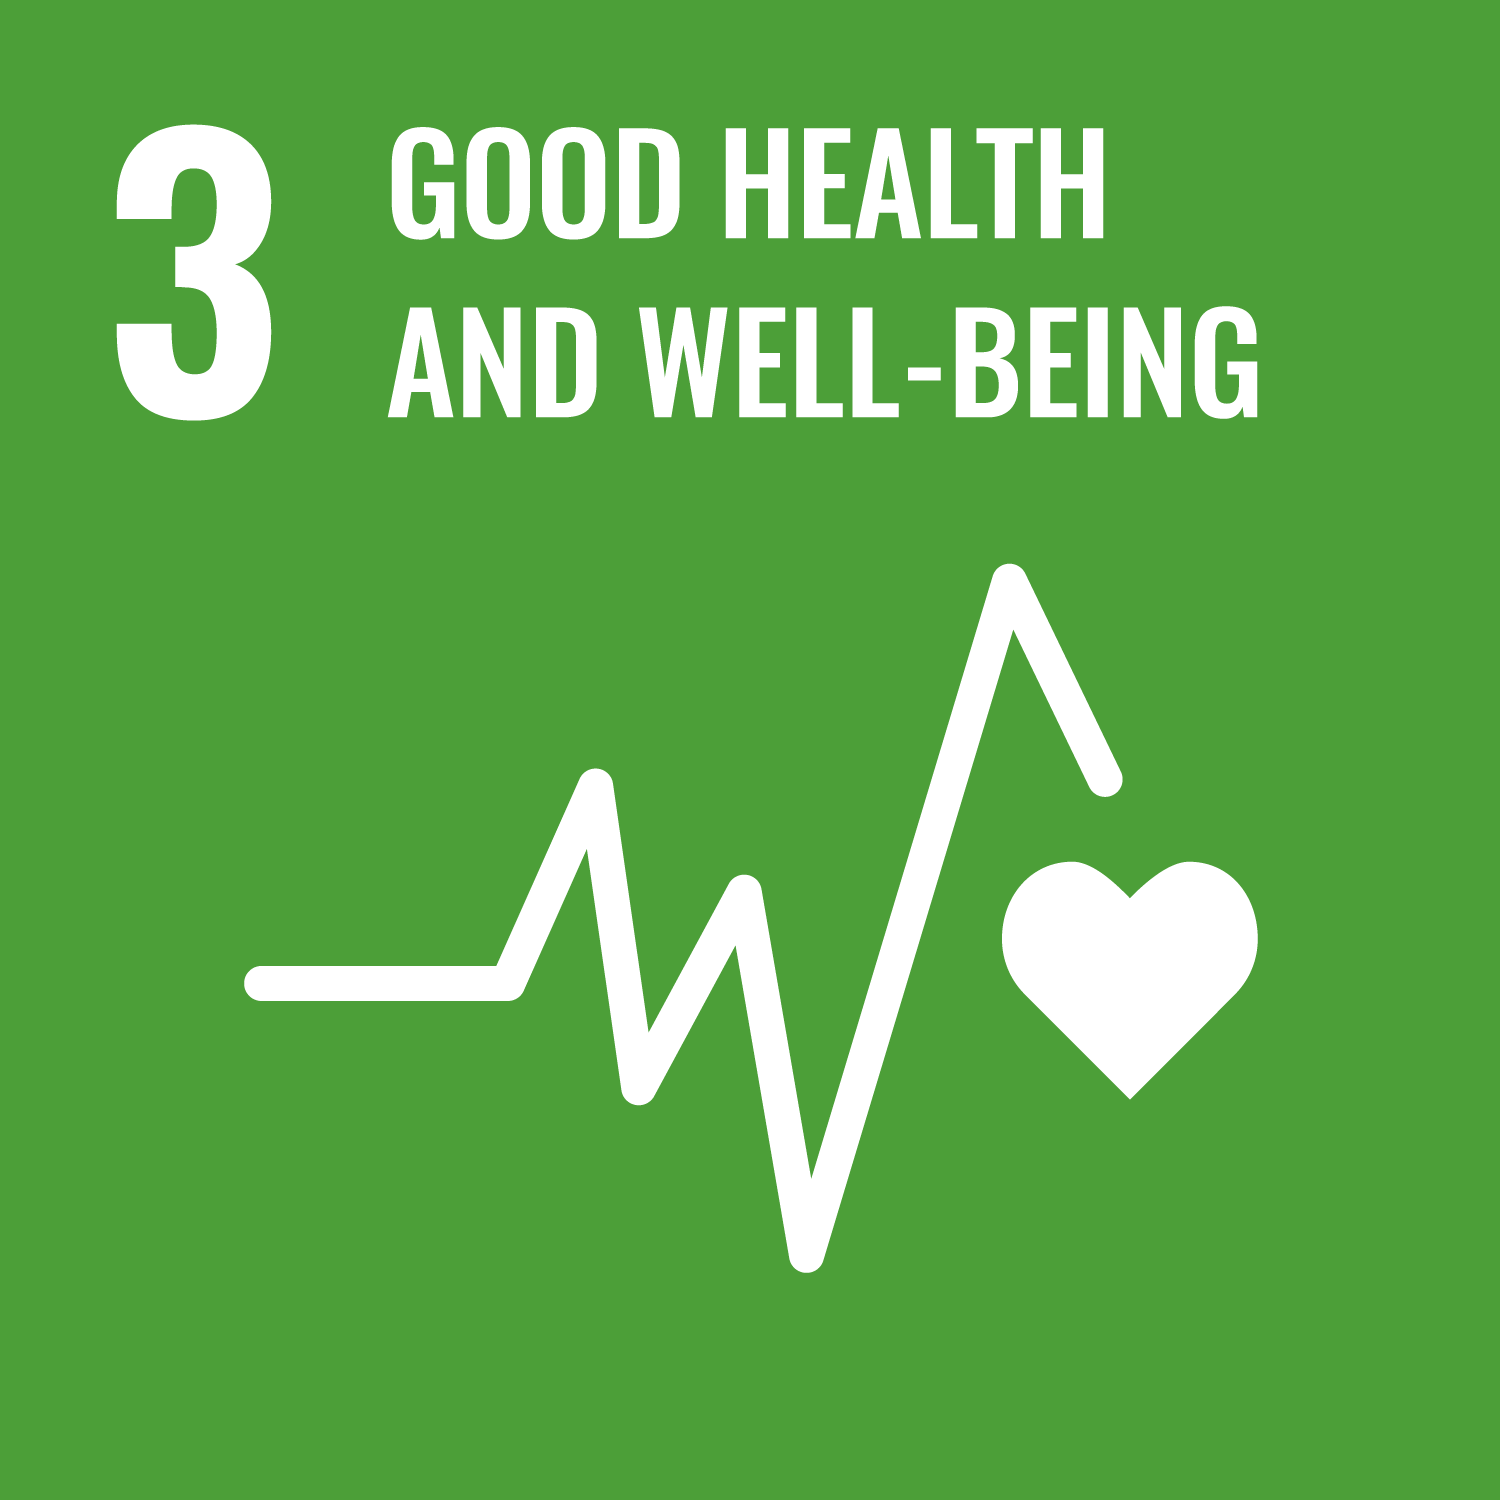 Goal 03 Good Health and Well-Being